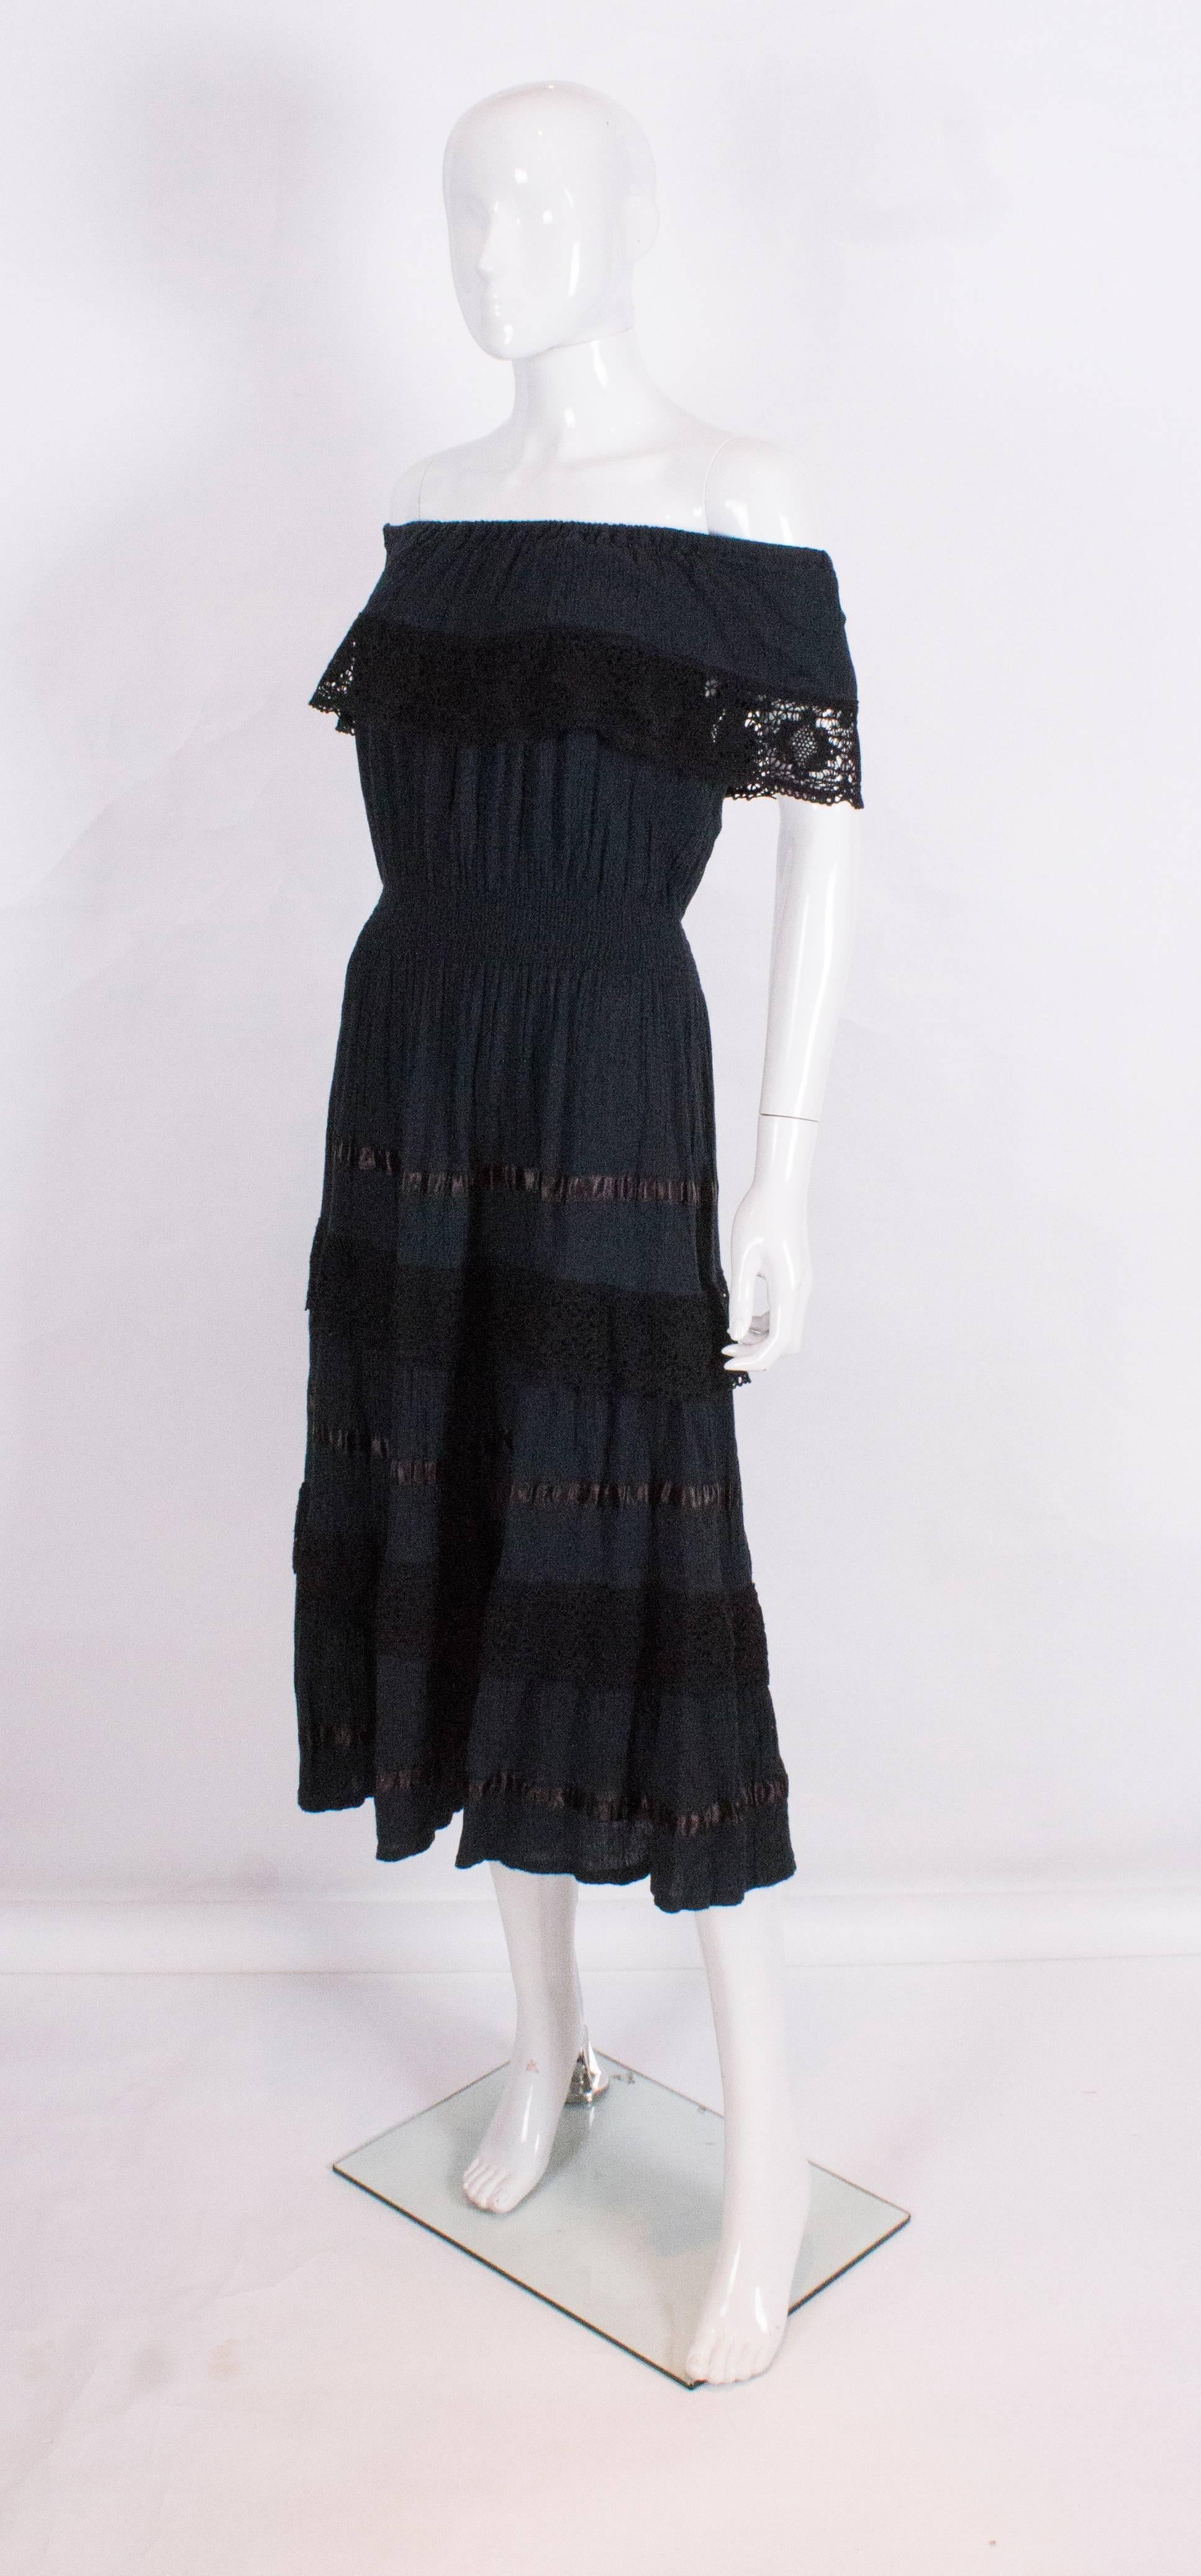 A chic black on/off shoulder dress with an elasticated waist, flared skirt with ribbon and crochet detail.The waist measure 22'', but as it is elasticated, can stretch